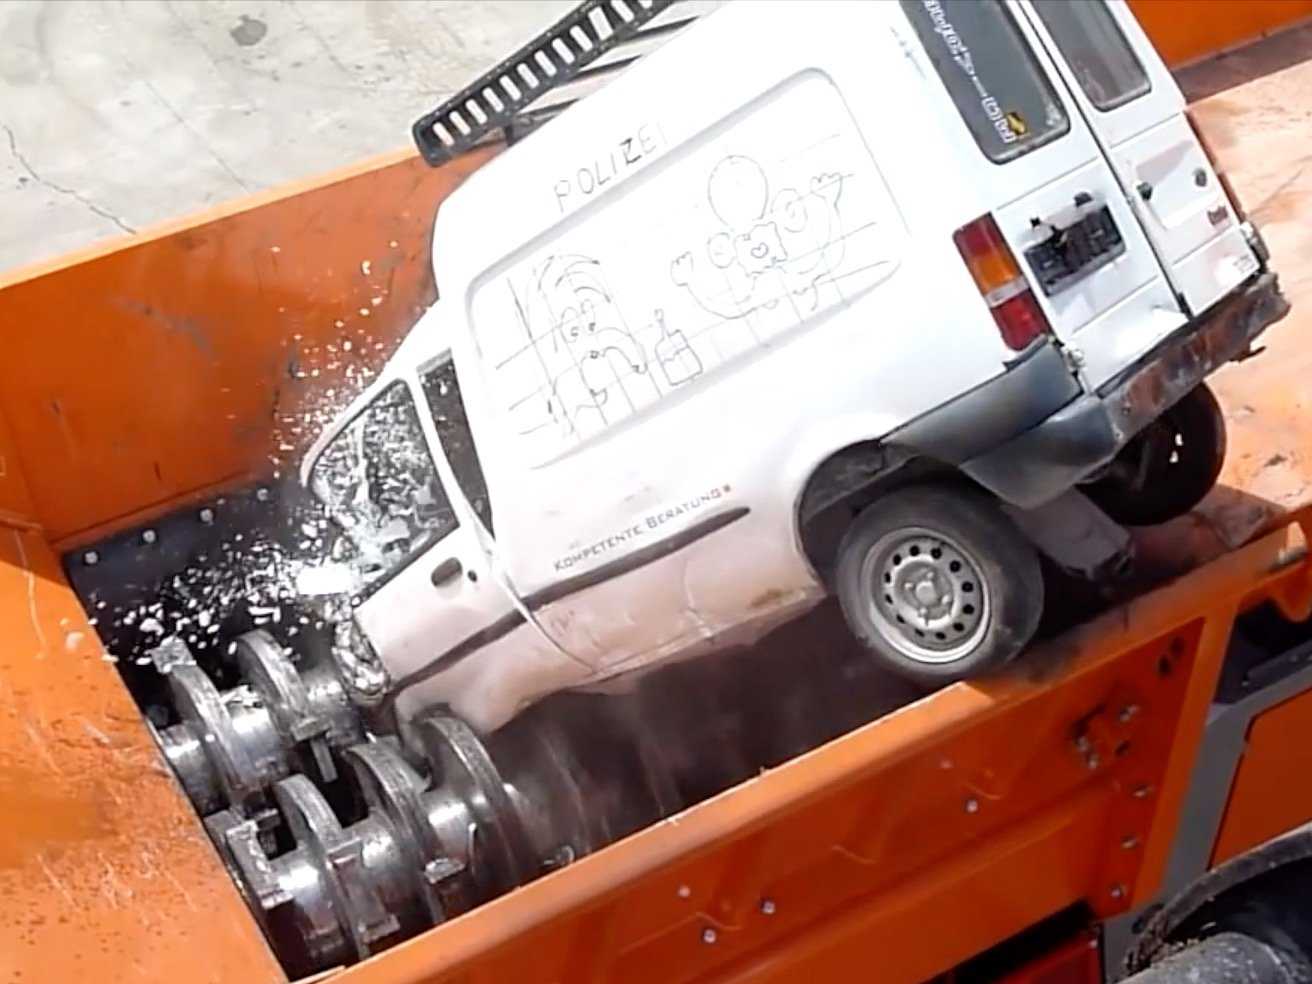 watch-this-massive-shredder-swallow-cars-whole-and-spit-them-out-in-tiny-pieces